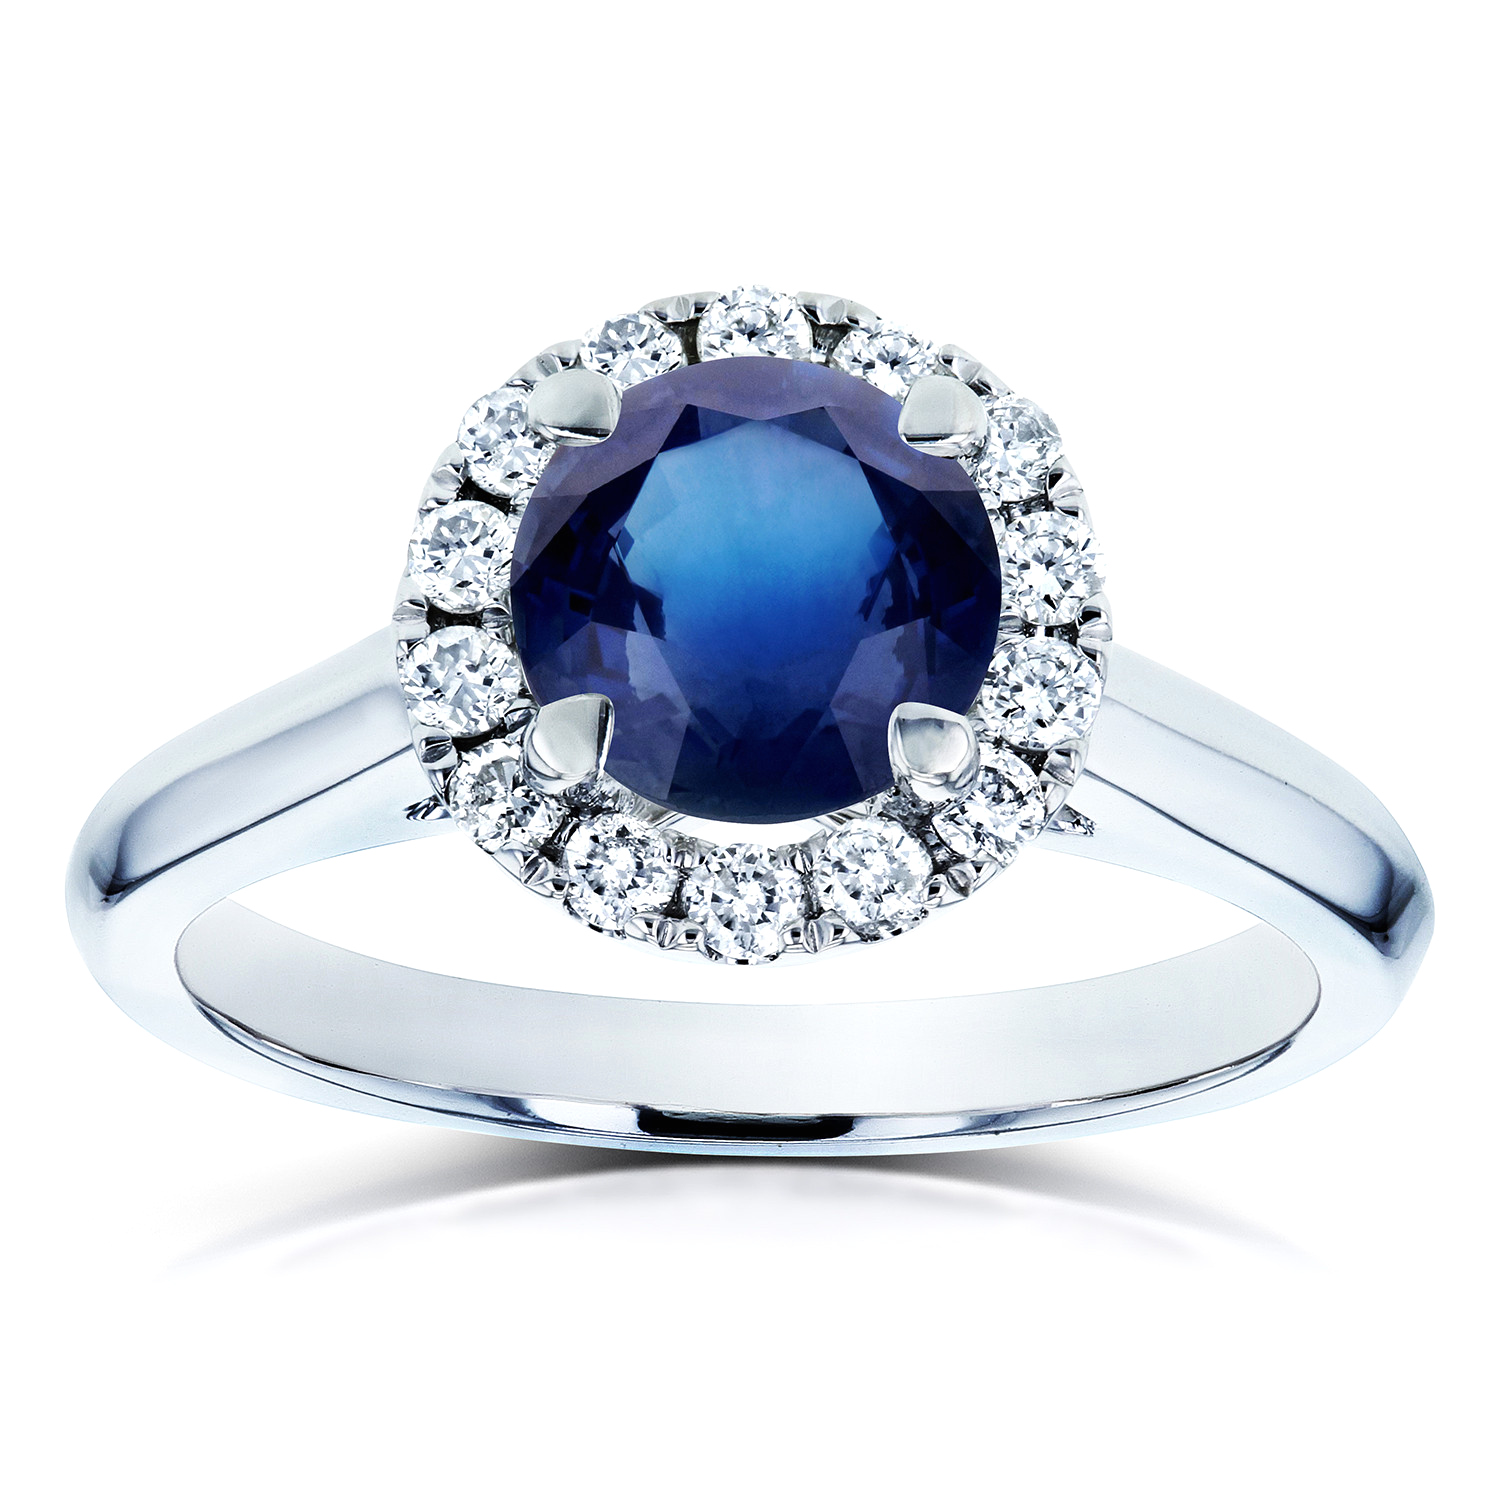 Blue Sapphire Engagement Rings Best Of Marguerite 1735 Diamond and ...